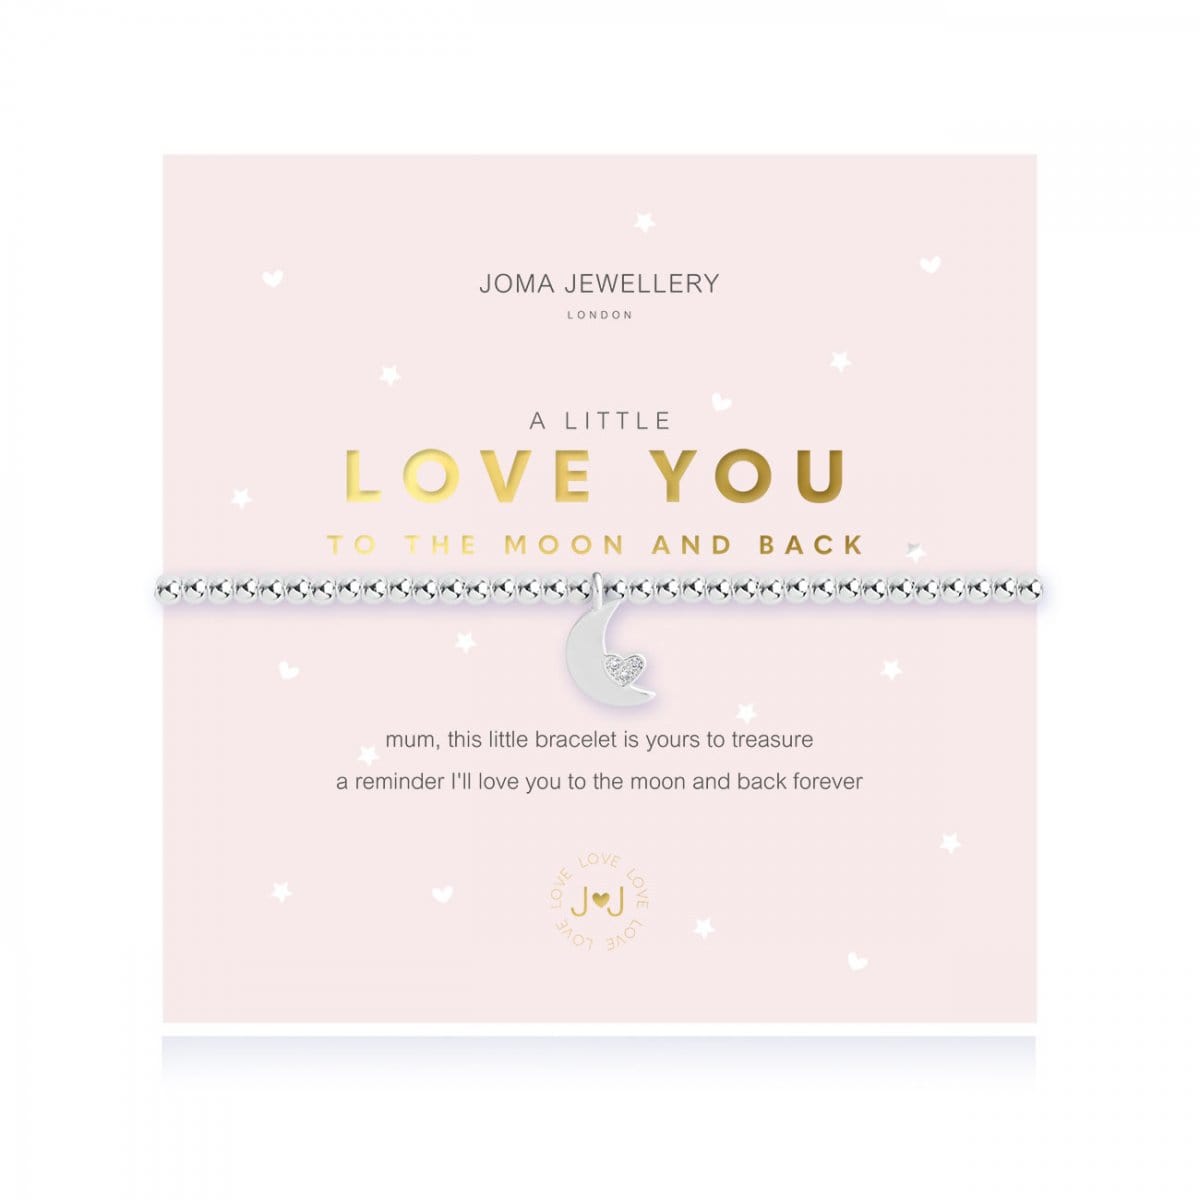 Joma Jewellery Bracelet Joma Jewellery Bracelet - a little Love You To The Moon And Back